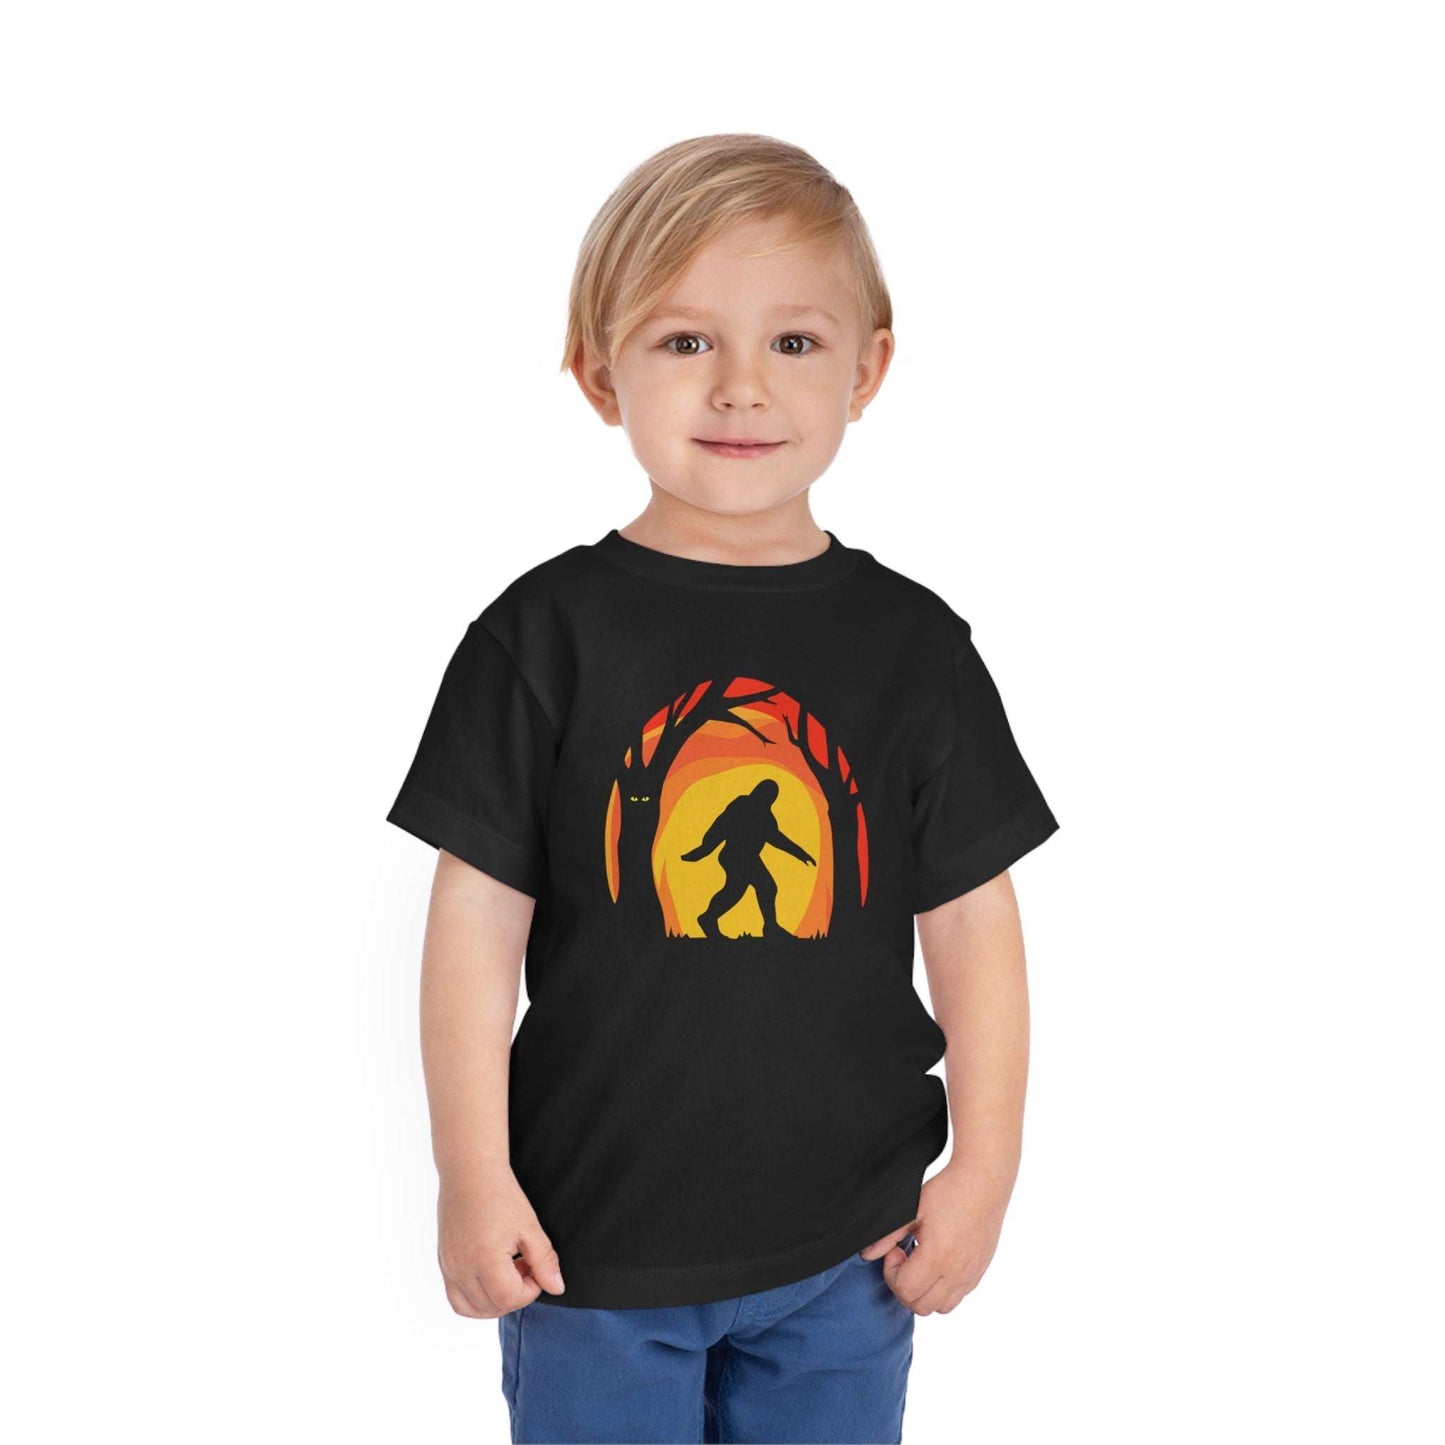 Bigfoot Toddler Short Sleeve Tee ShirtWolfe Paw DesignsBigfoot Toddler Short Sleeve Tee ShirtFor your cryptid fan!
100% Airlume combed and ringspun cotton (fiber content may vary for different colors)Bella Canvas Extra light fabric (3.9 oz/yd² (132 g/m²))


Bigfoot Toddler Short Sleeve Tee Shirt